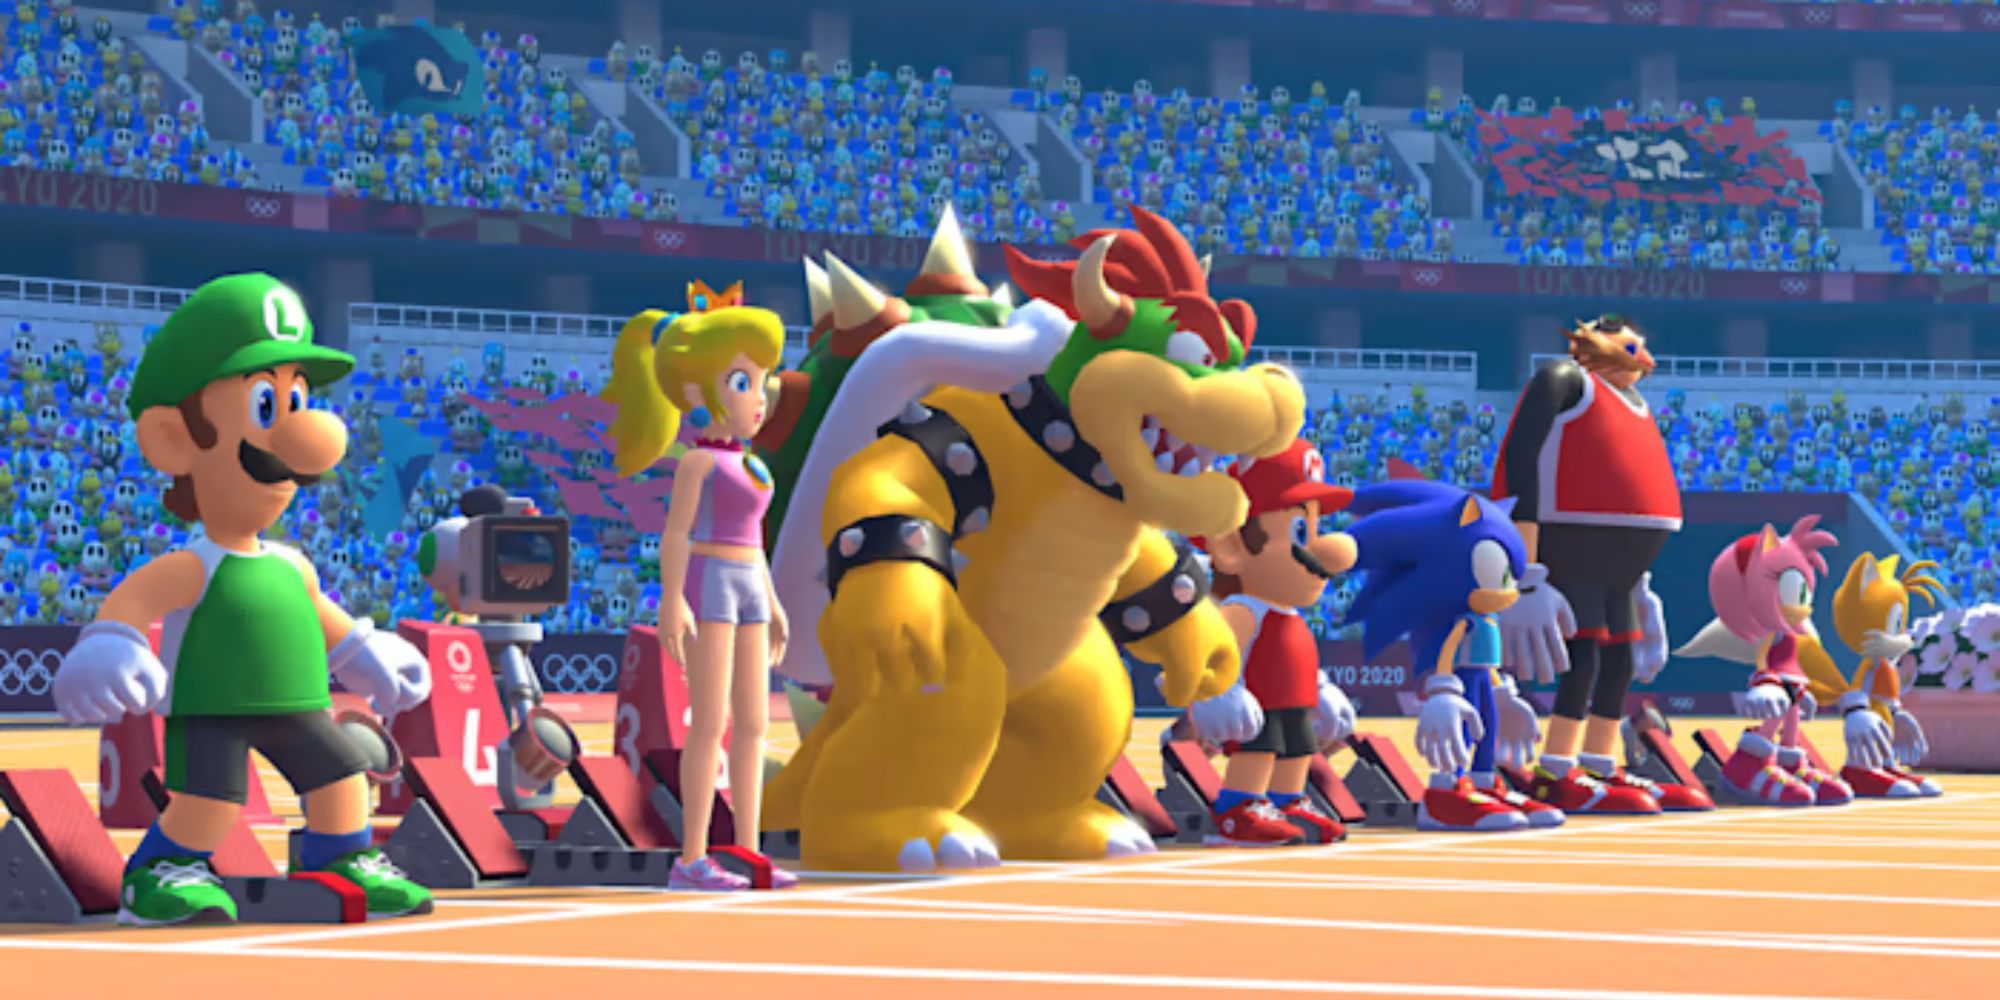 Luigi, Peach, Bowser, Mario, Sonic, Dr. Eggman, Amy, and Tails get ready to race each other